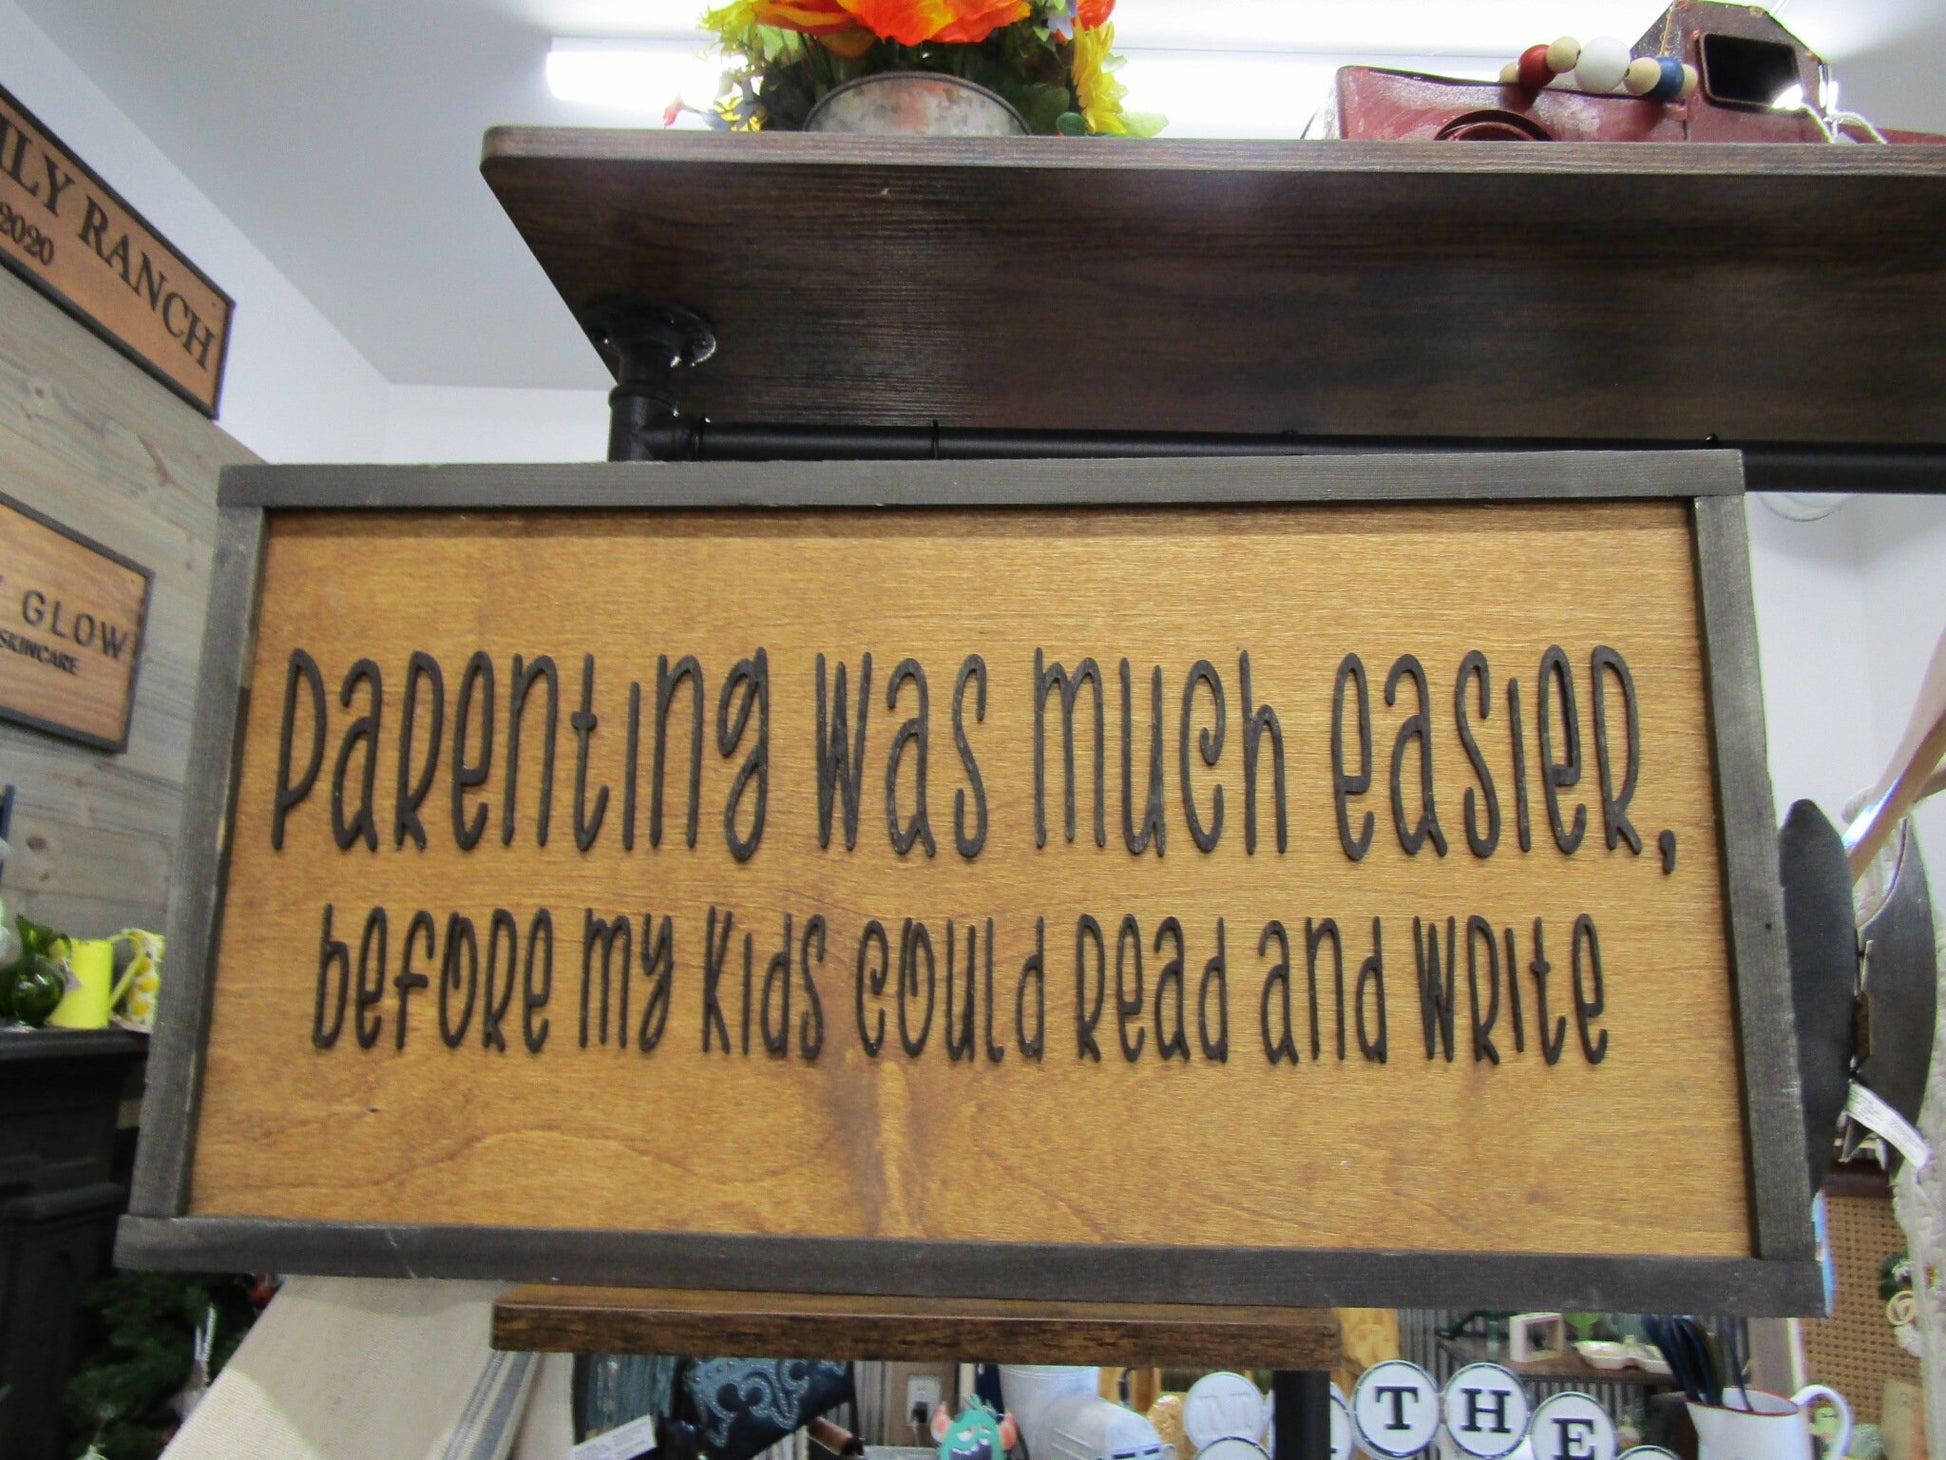 Parenting Funny Easy Parenting Relatable Home Decor Wooden Handmade Sign 3D Kids Parenting was Easier Before Kids could Read Teenager